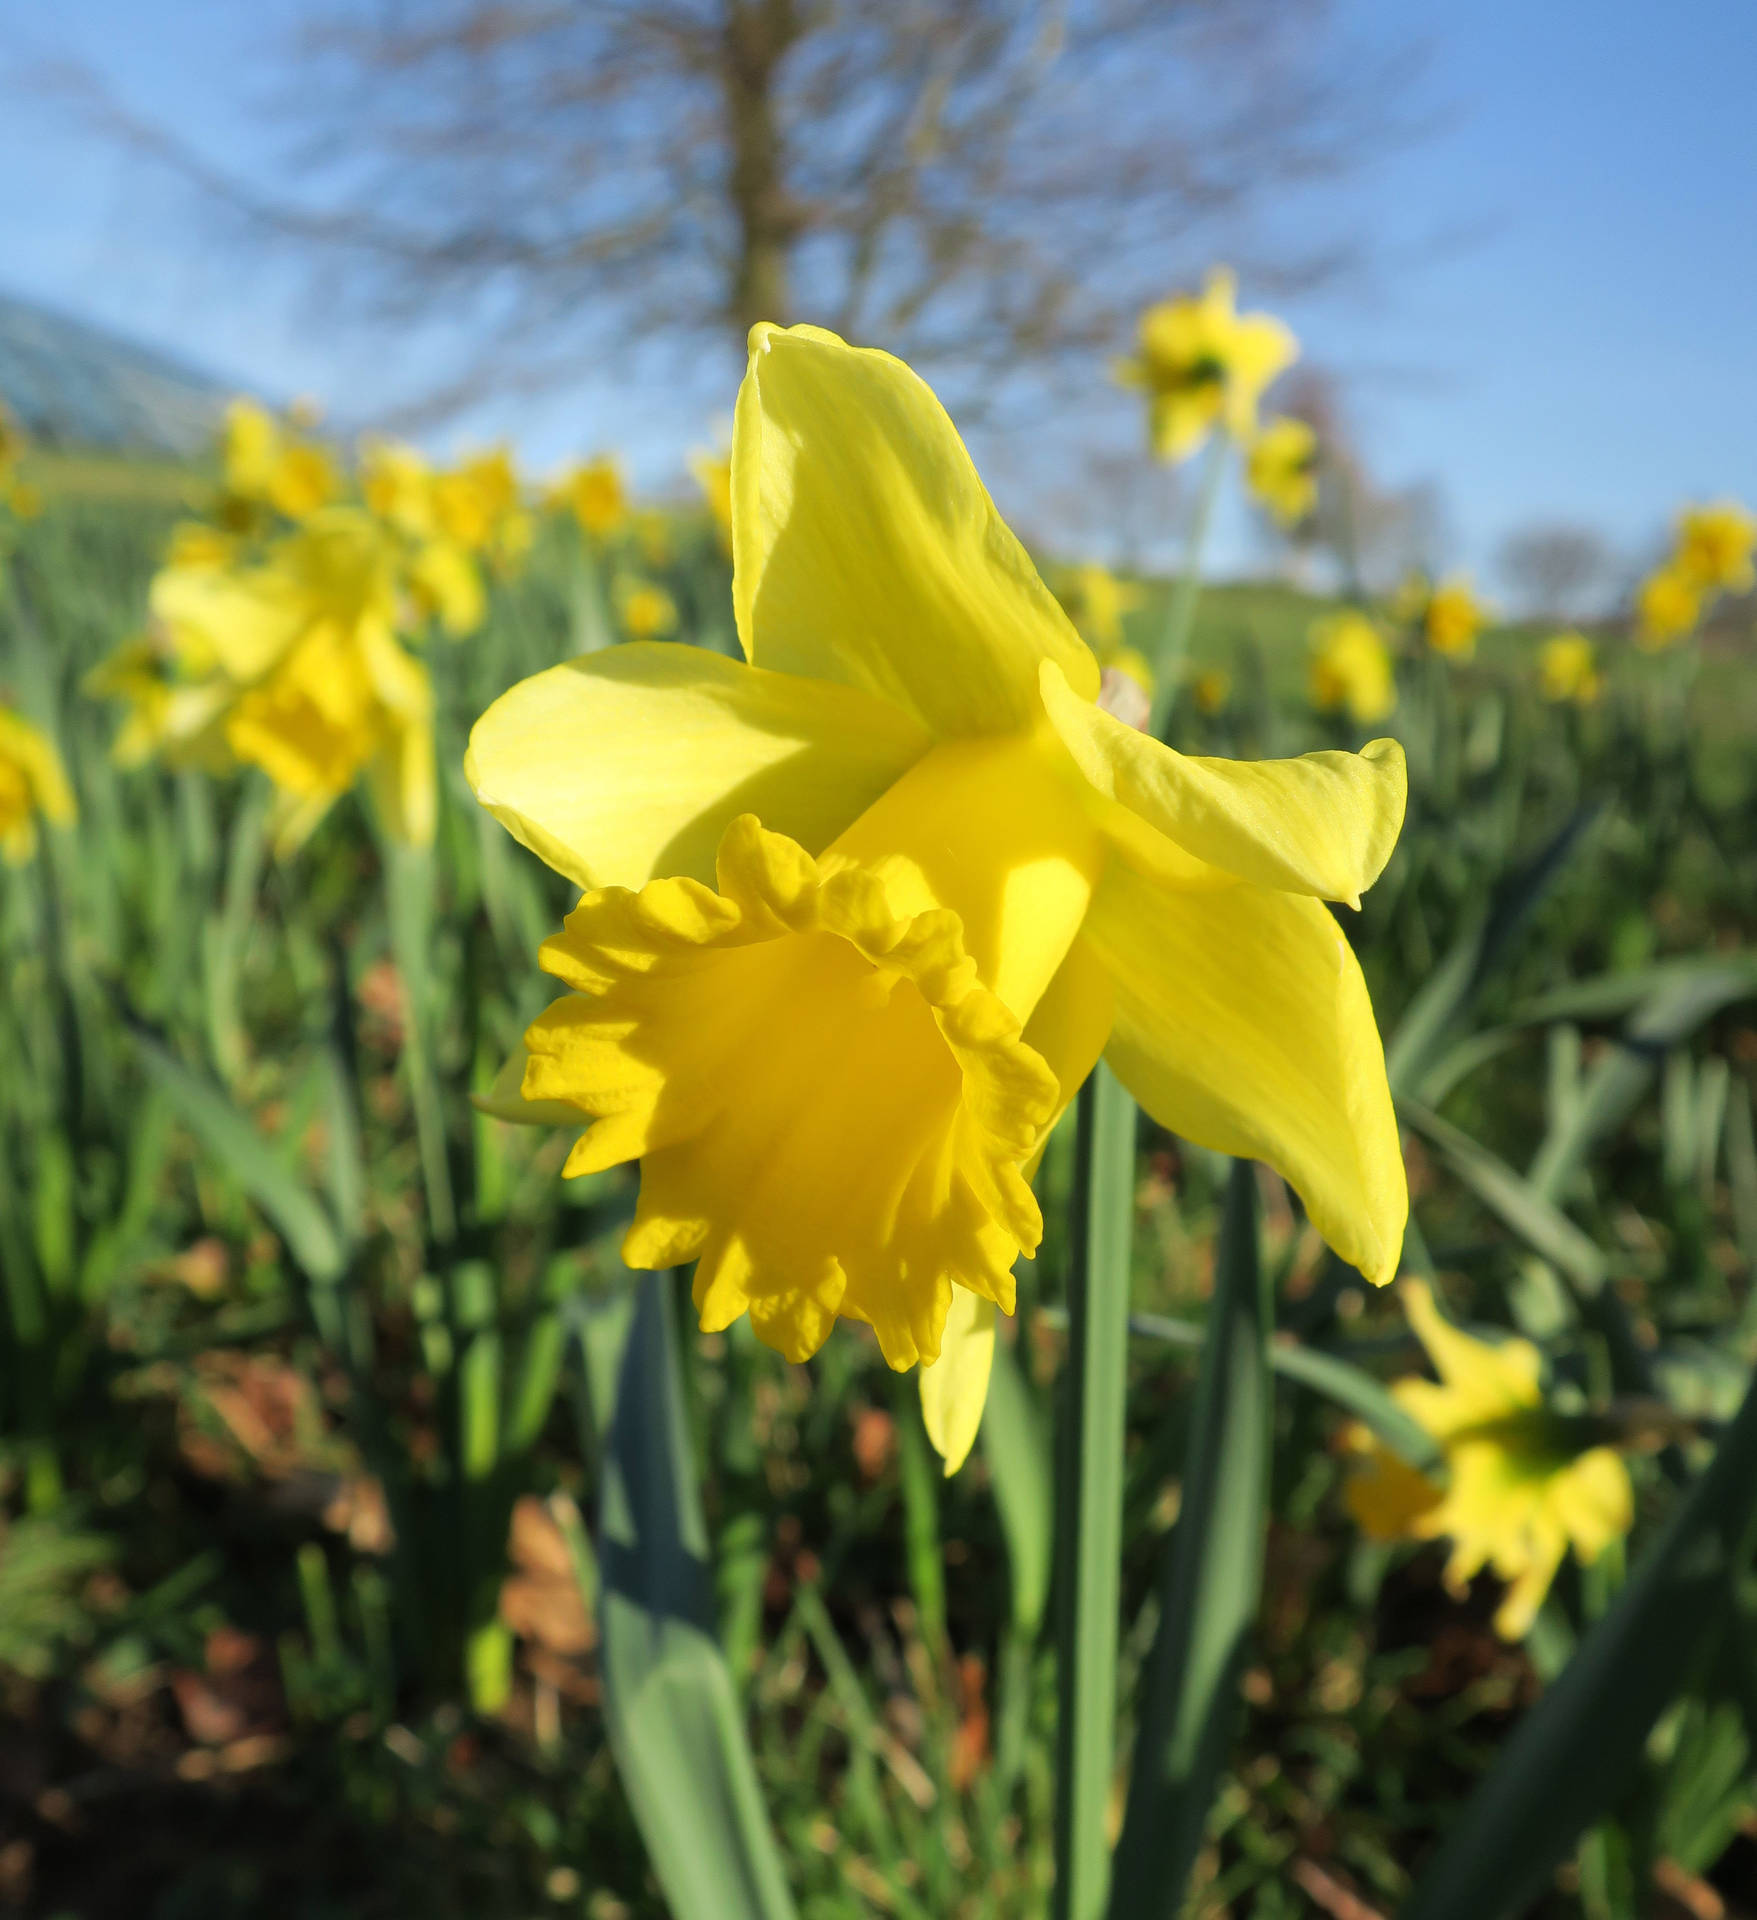 Caption: Bright Yellow Rijnveld's Early Sensation Narcissus Flowers In Full Bloom Background